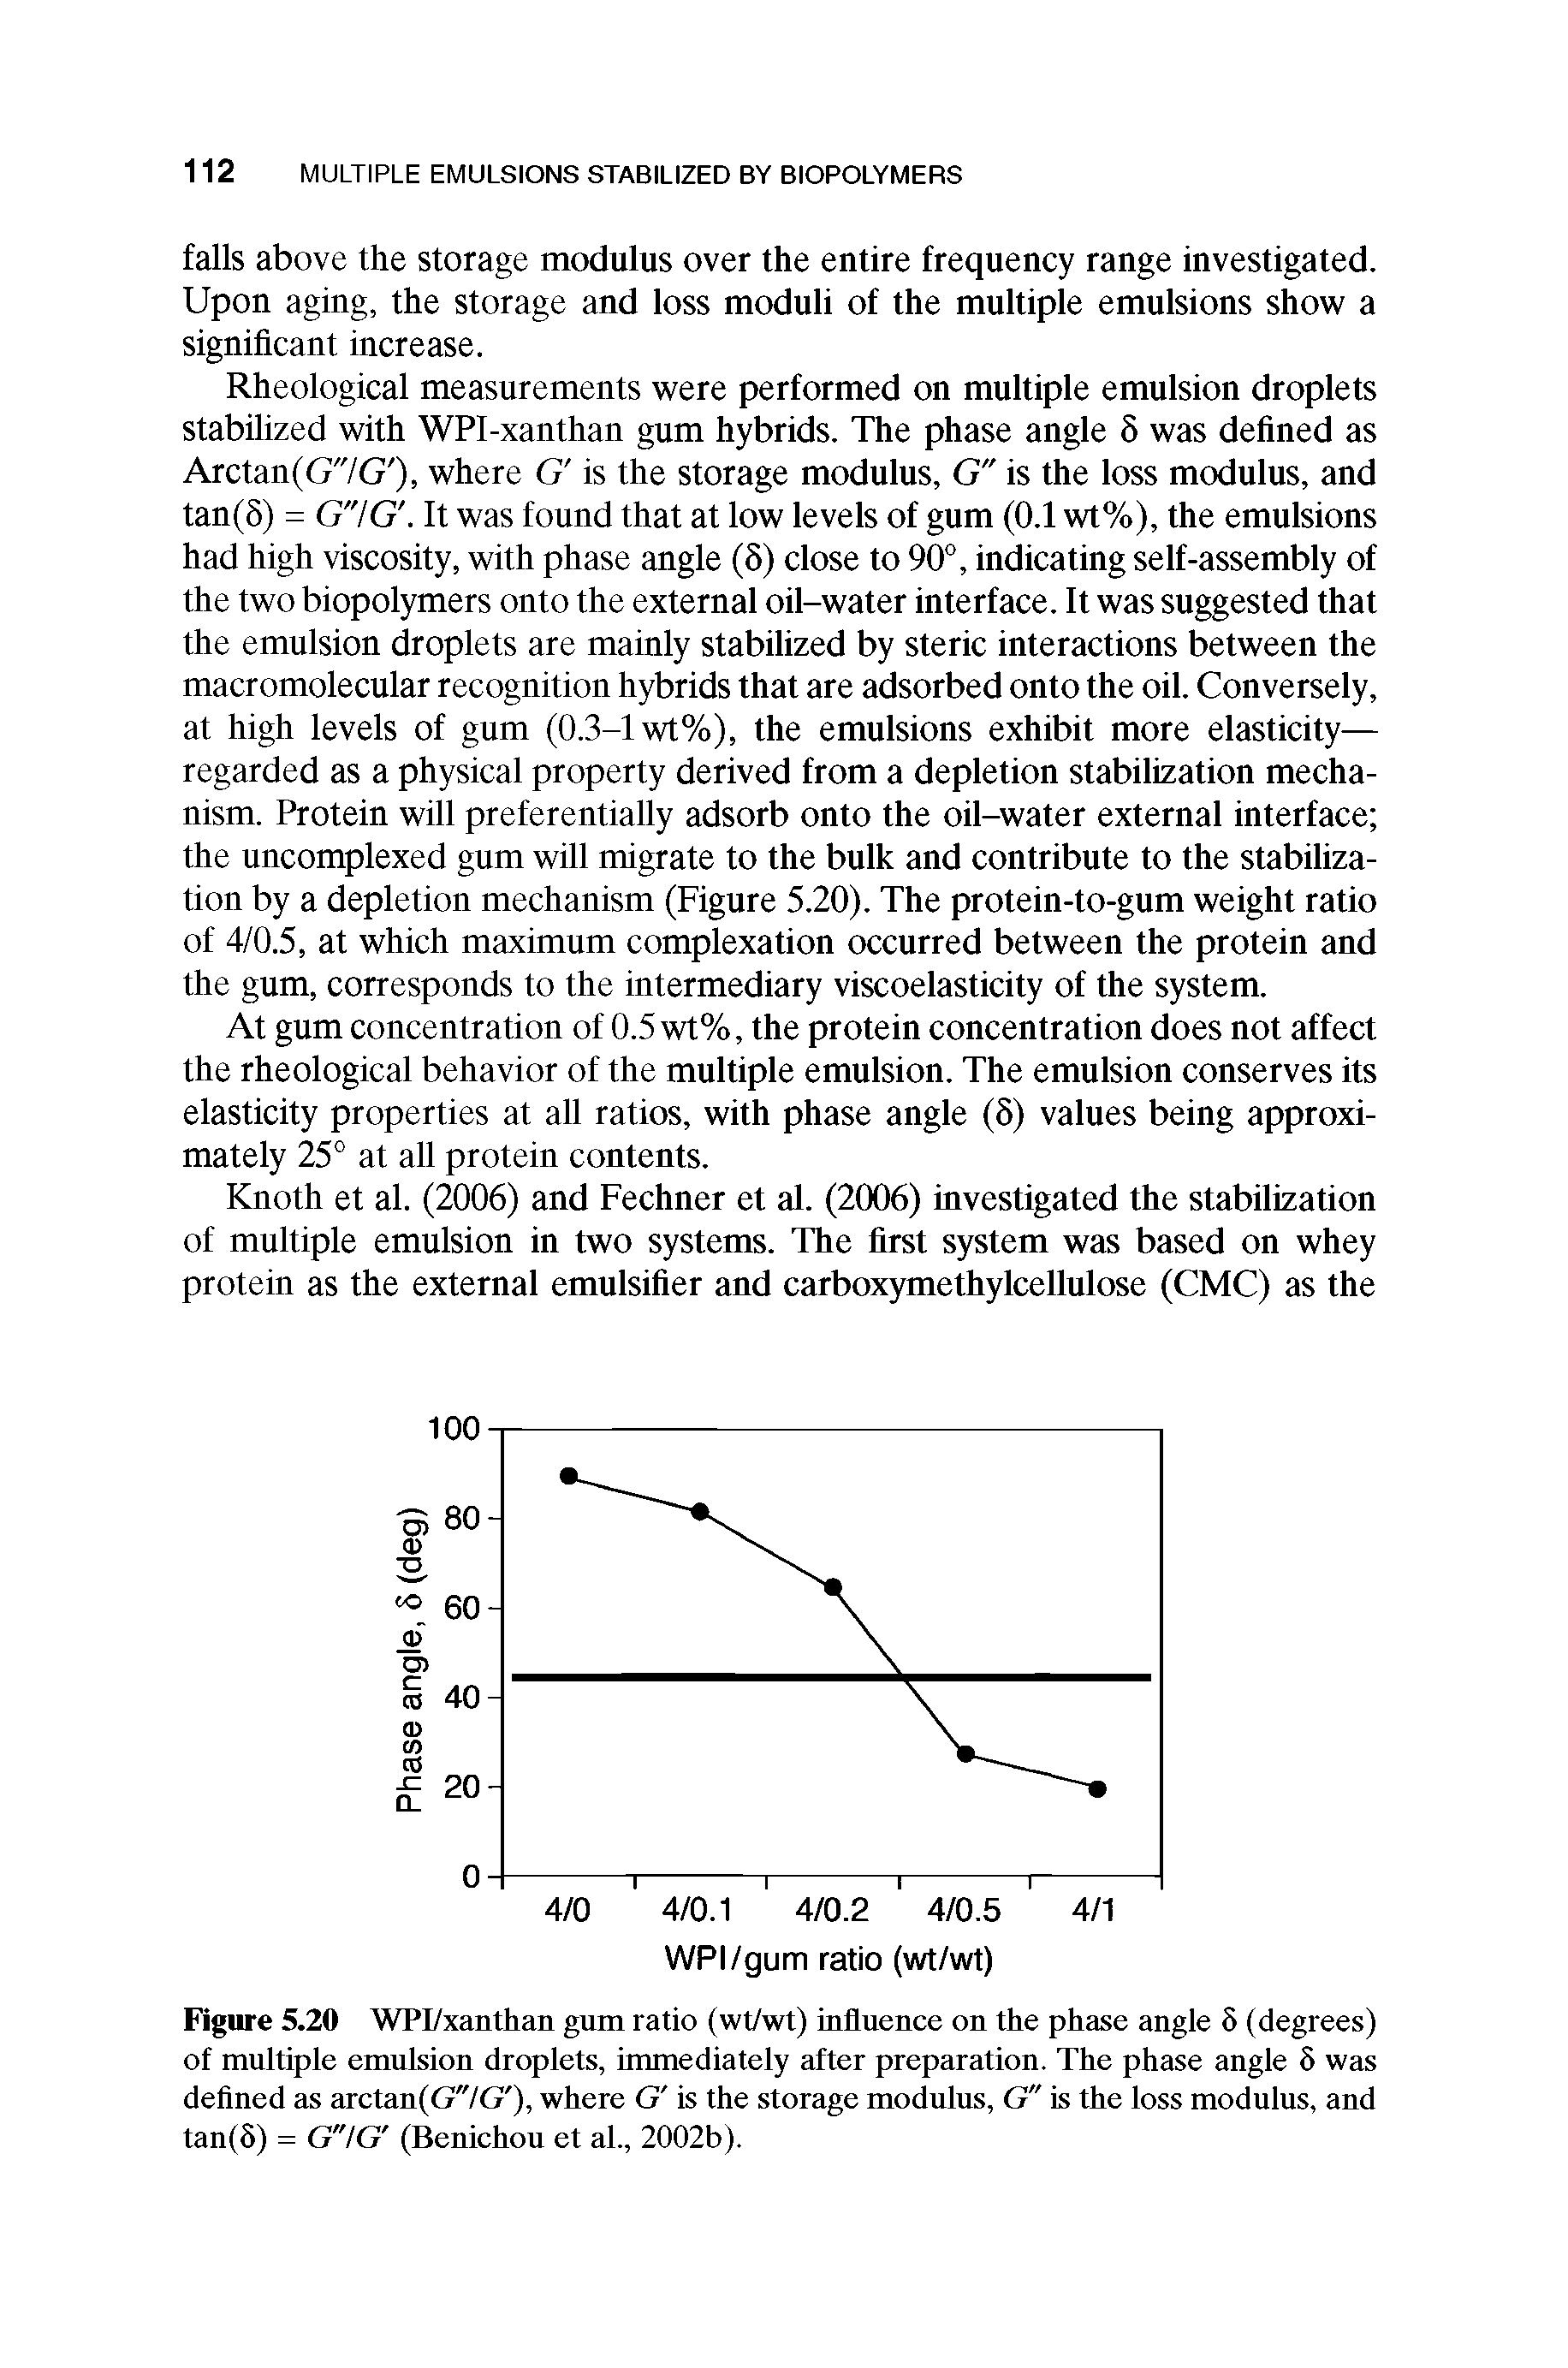 Figure 5.20 WPI/xanthan gum ratio (wt/wt) influence on the phase angle 5 (degrees) of multiple emulsion droplets, immediately after preparation. The phase angle 5 was defined as arctan(G7G ), where G is the storage modulus, G" is the loss modulus, and tan(5) = G"/G (Benichou et al., 2002b).